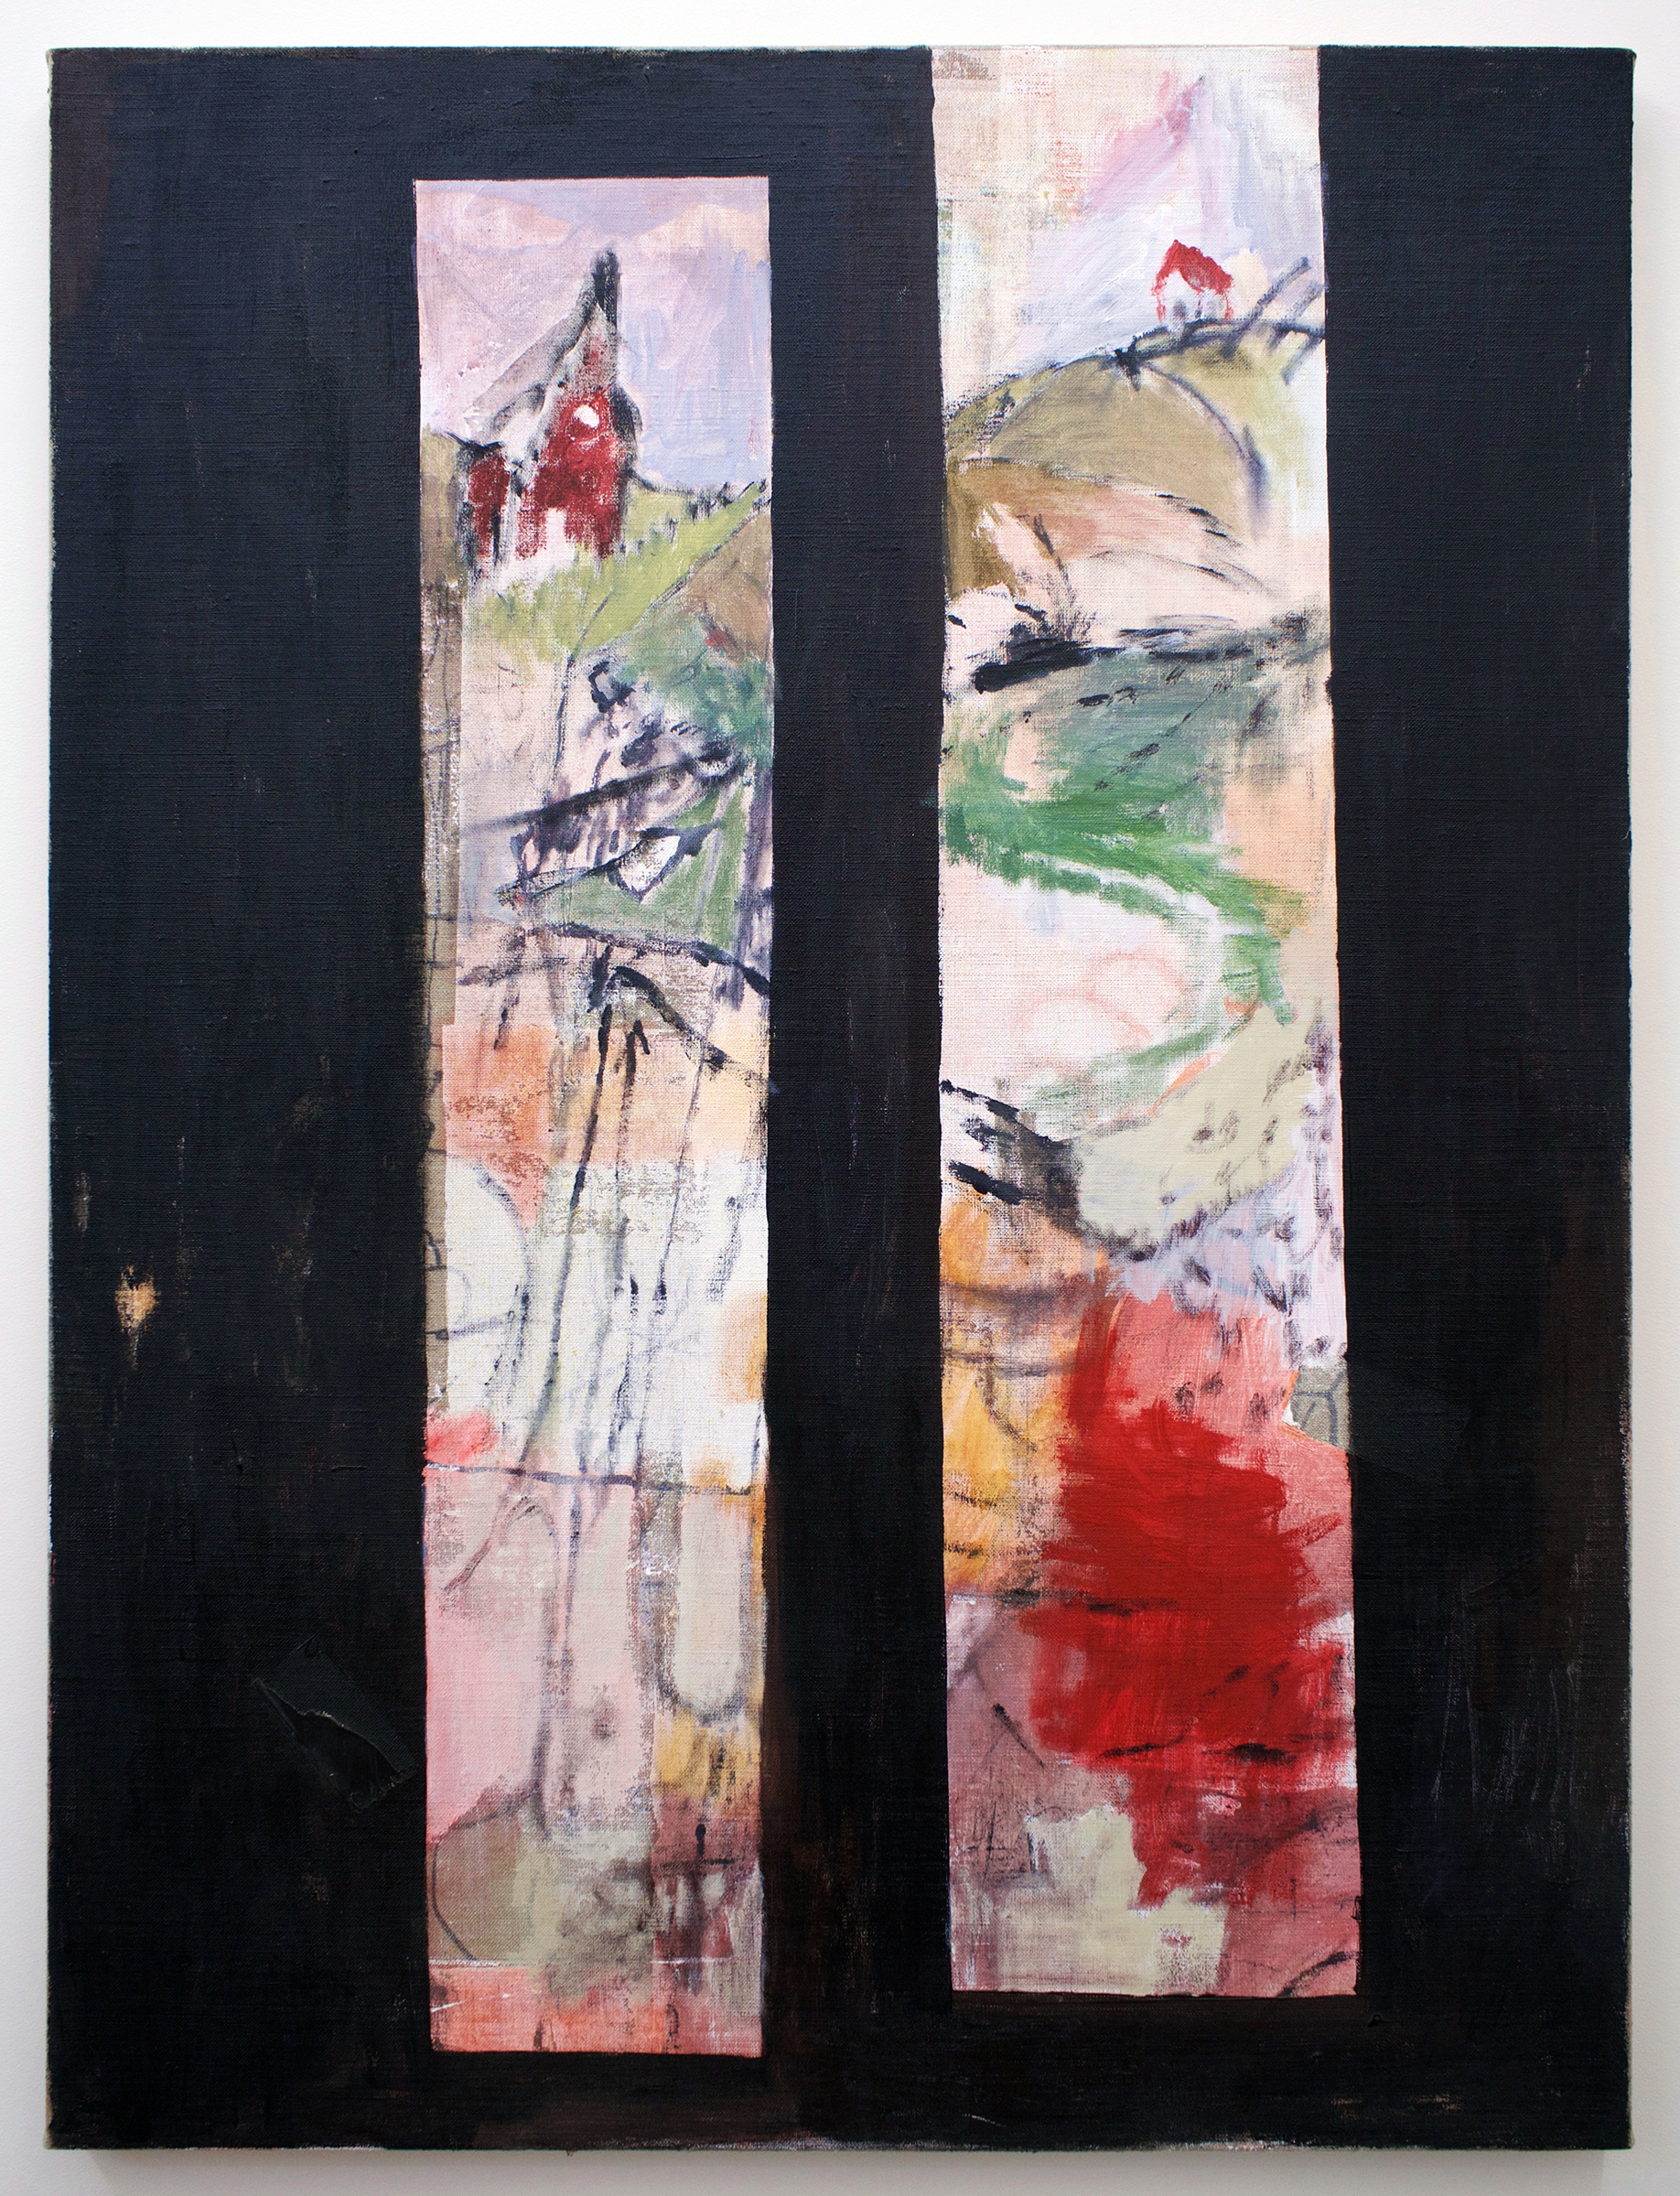   TED GAHL   Scene in Towers (G.M.) , 2017, oil, acrylic, graphite, wood on linen, 48" x 36" 